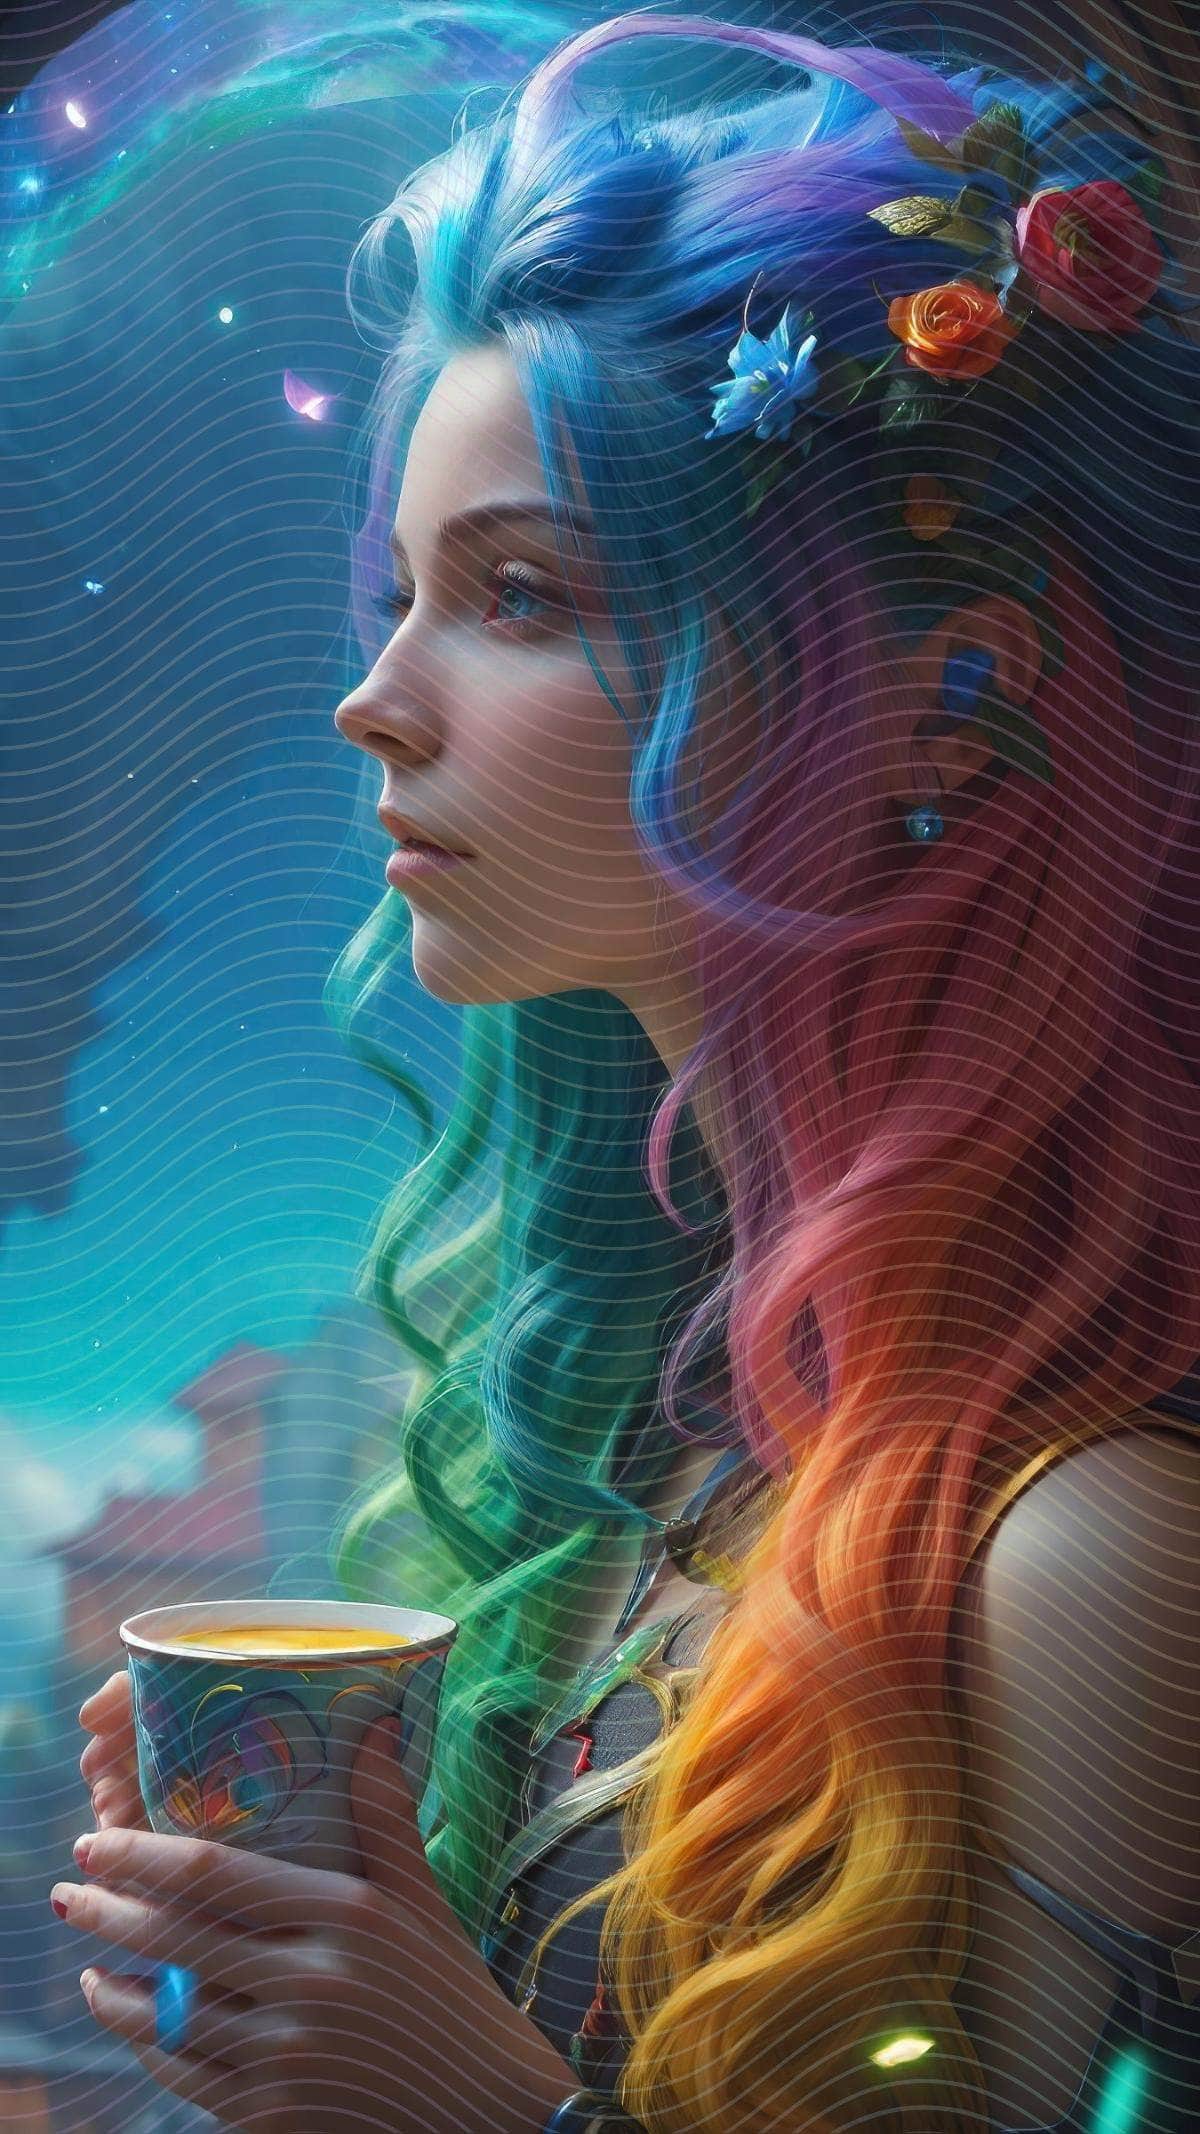 A Woman with Colorful Hair Holding a Cup